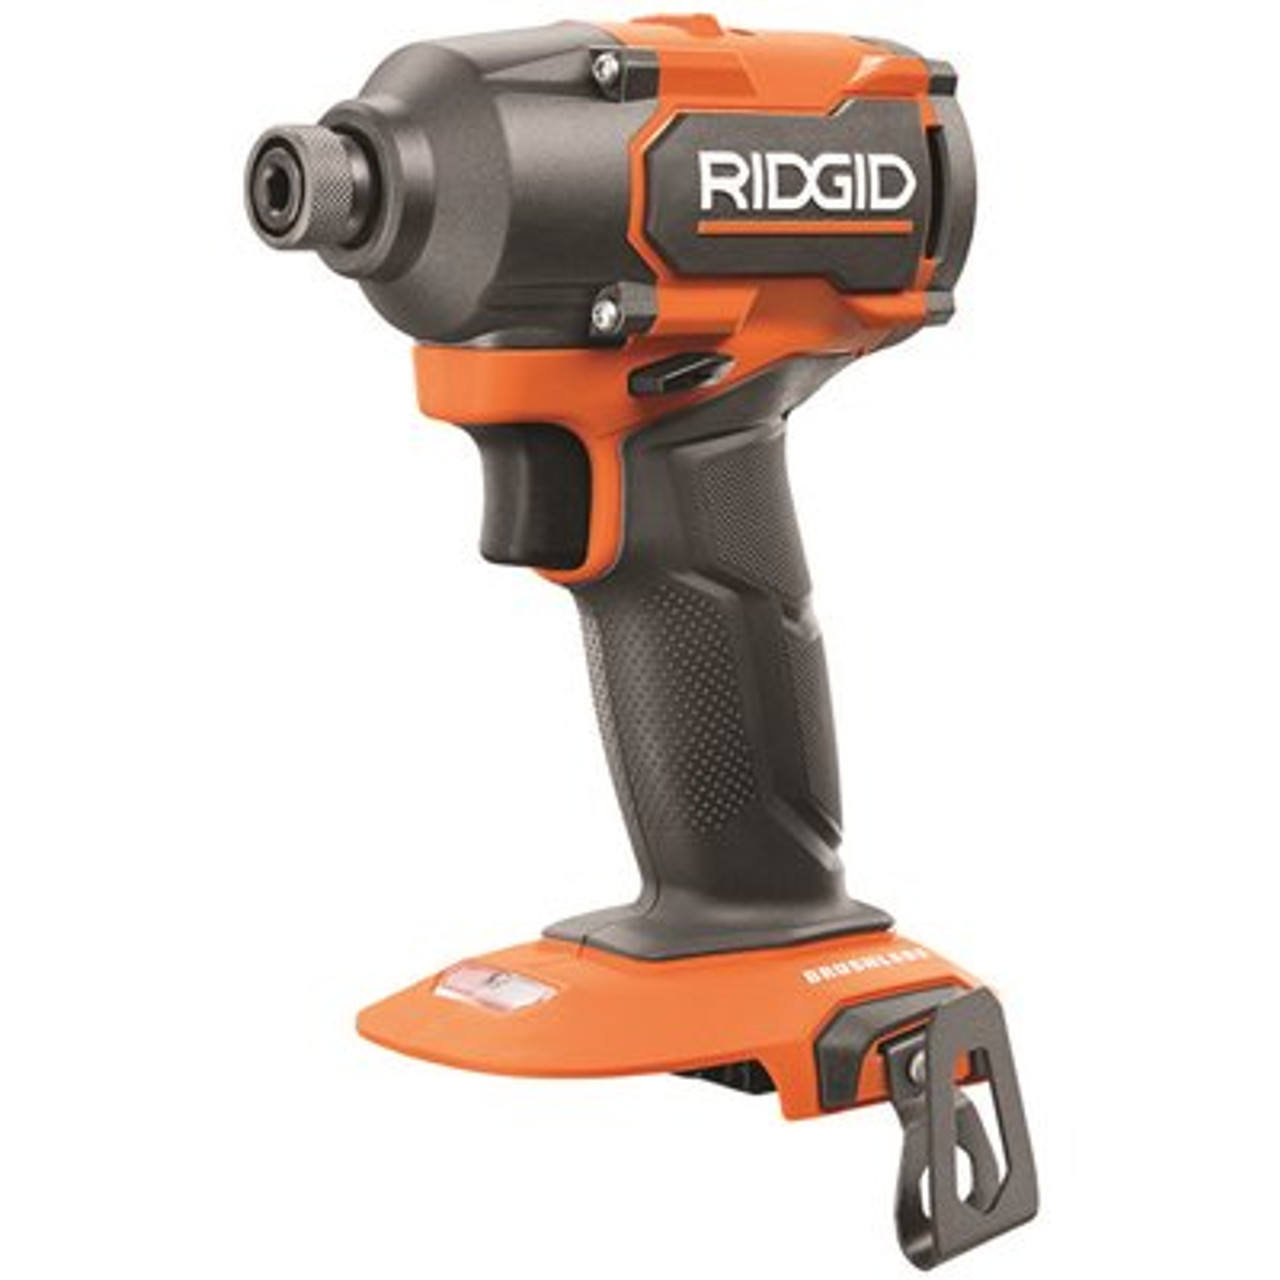 Ridgid 18-Volt Brushless Cordless 3-Speed 1/4 In. Impact Driver (Tool Only)